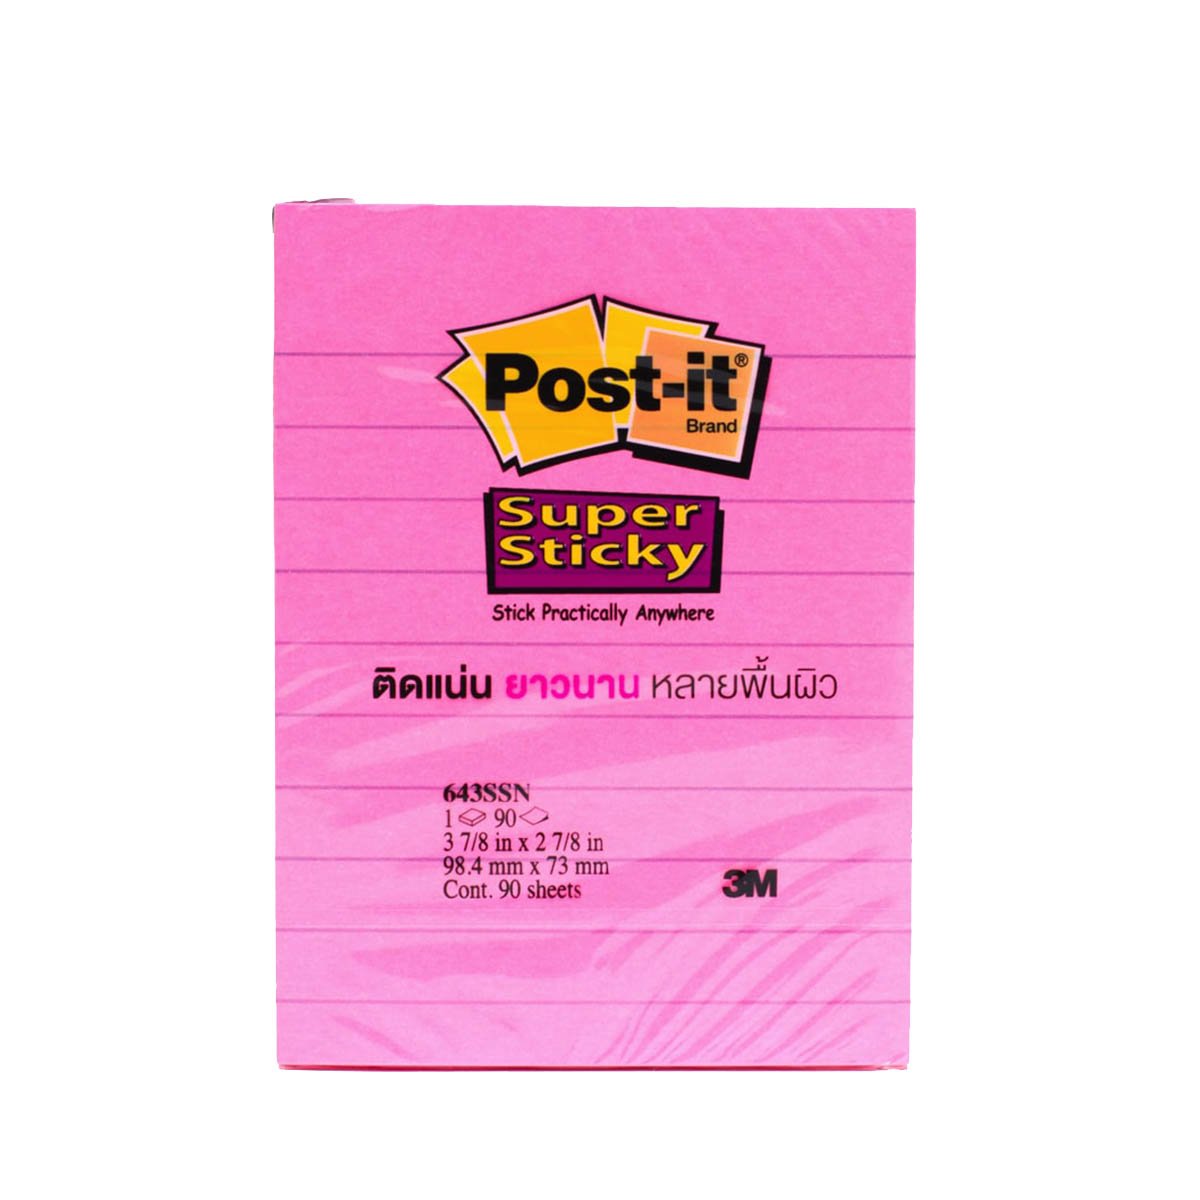 3M Post-it Super Sticky Lined Neon Pink, 4in X 3in, 90 Sheets